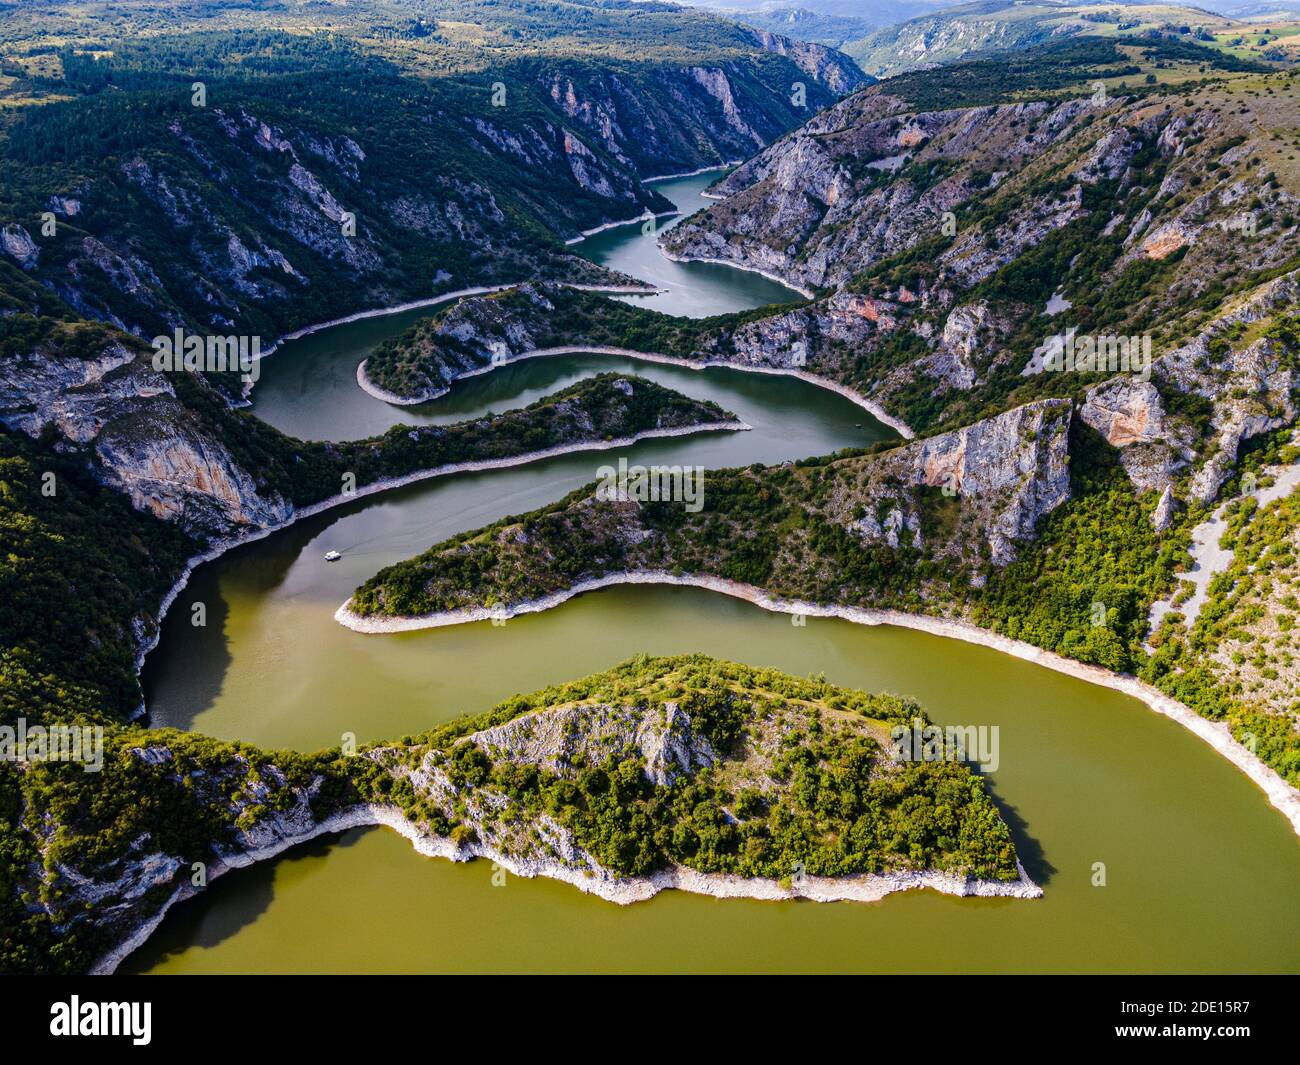 Uvac River meandering through the mountains, Uvac Special Nature Reserve, Serbia, Europe Stock Photo